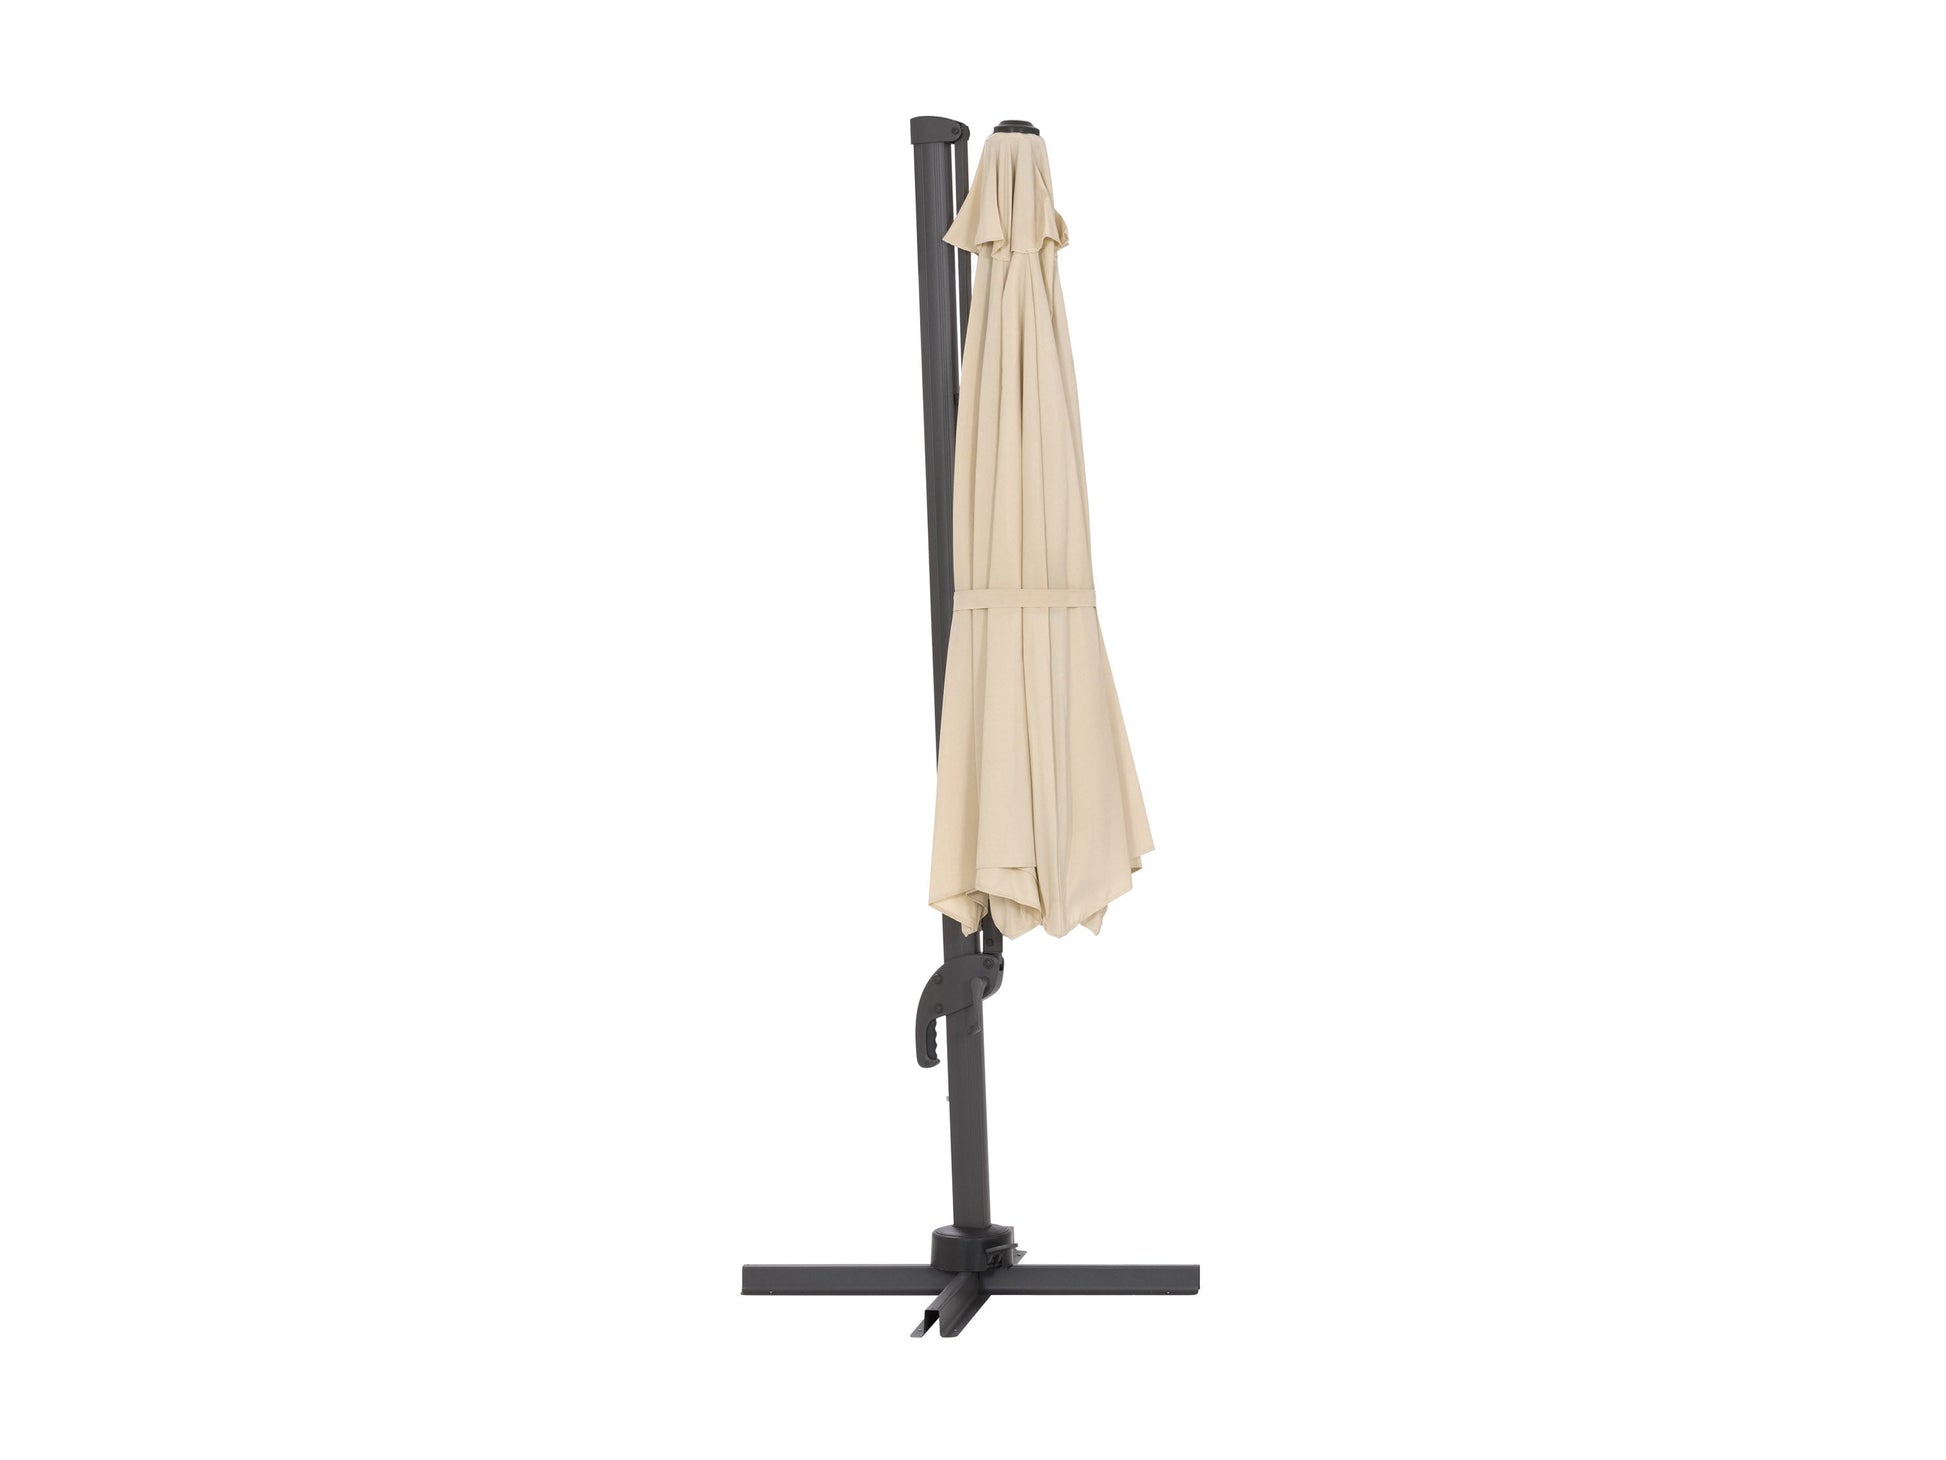 warm white deluxe offset patio umbrella 500 Series product image CorLiving#color_warm-white